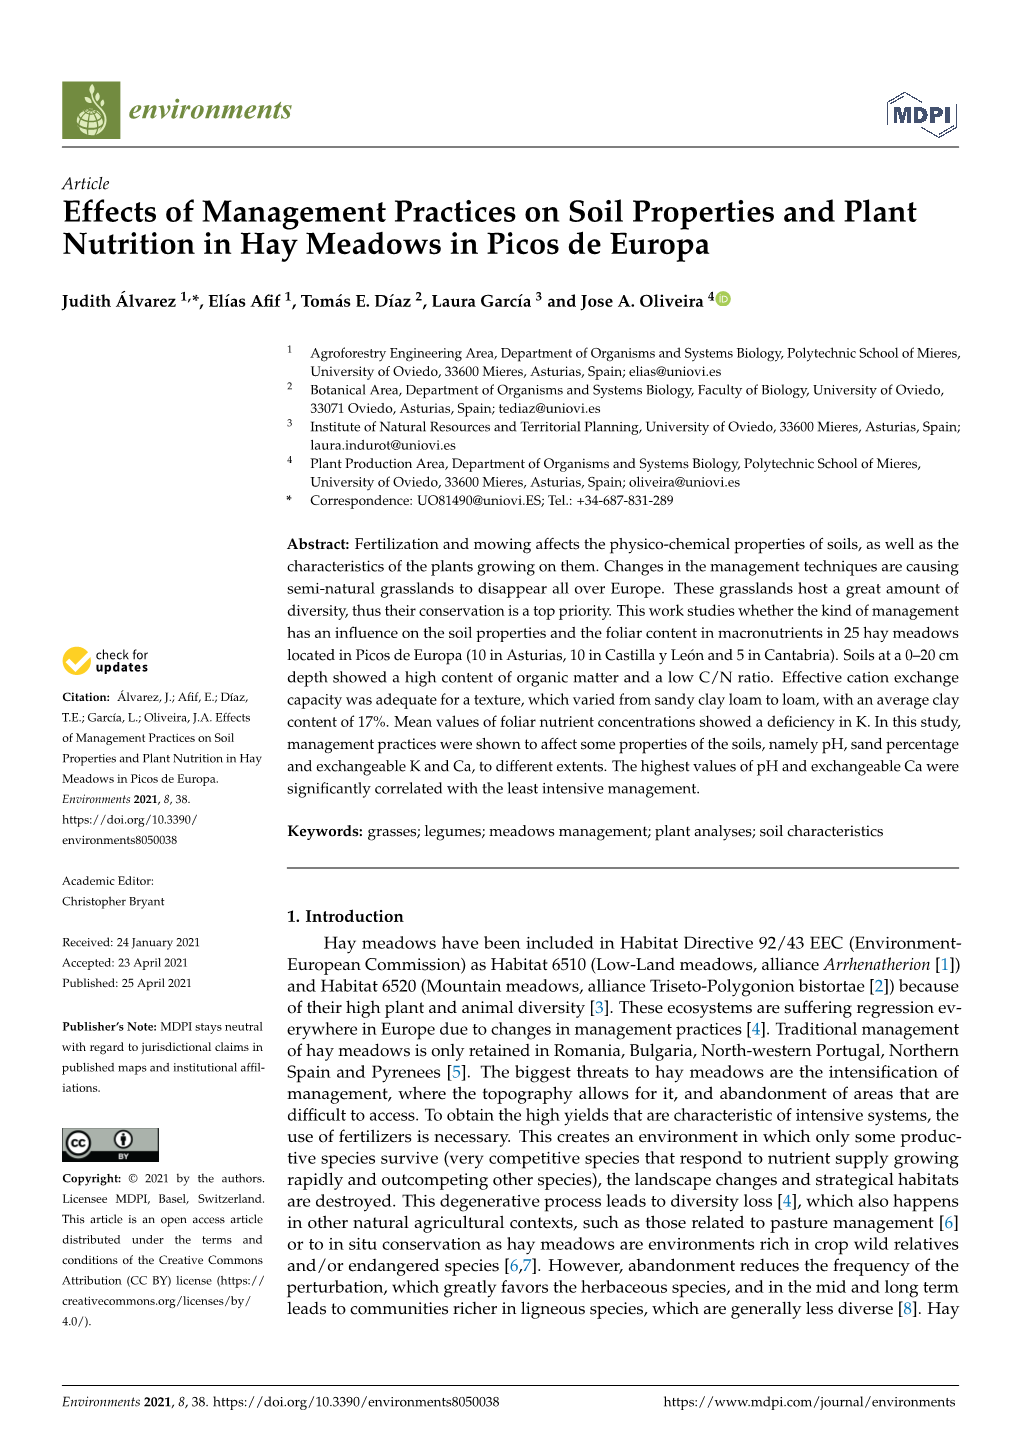 Effects of Management Practices on Soil Properties and Plant Nutrition in Hay Meadows in Picos De Europa